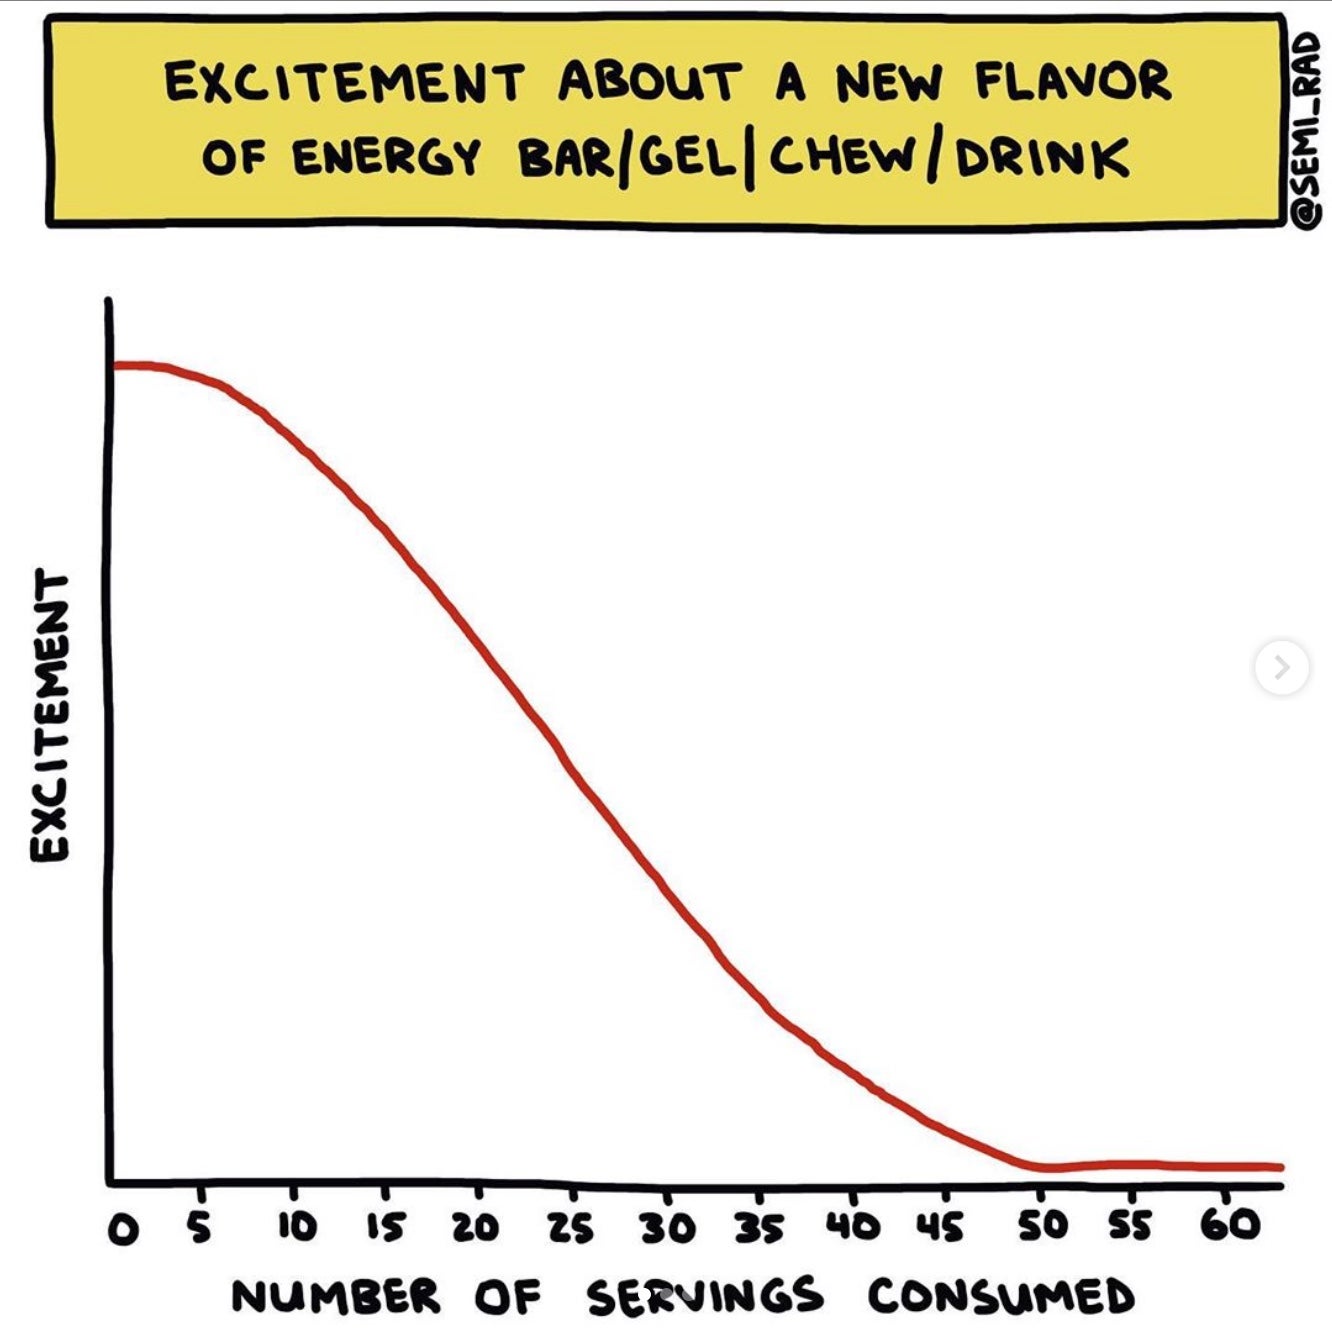 Chart of excitement about new energy bar flavor